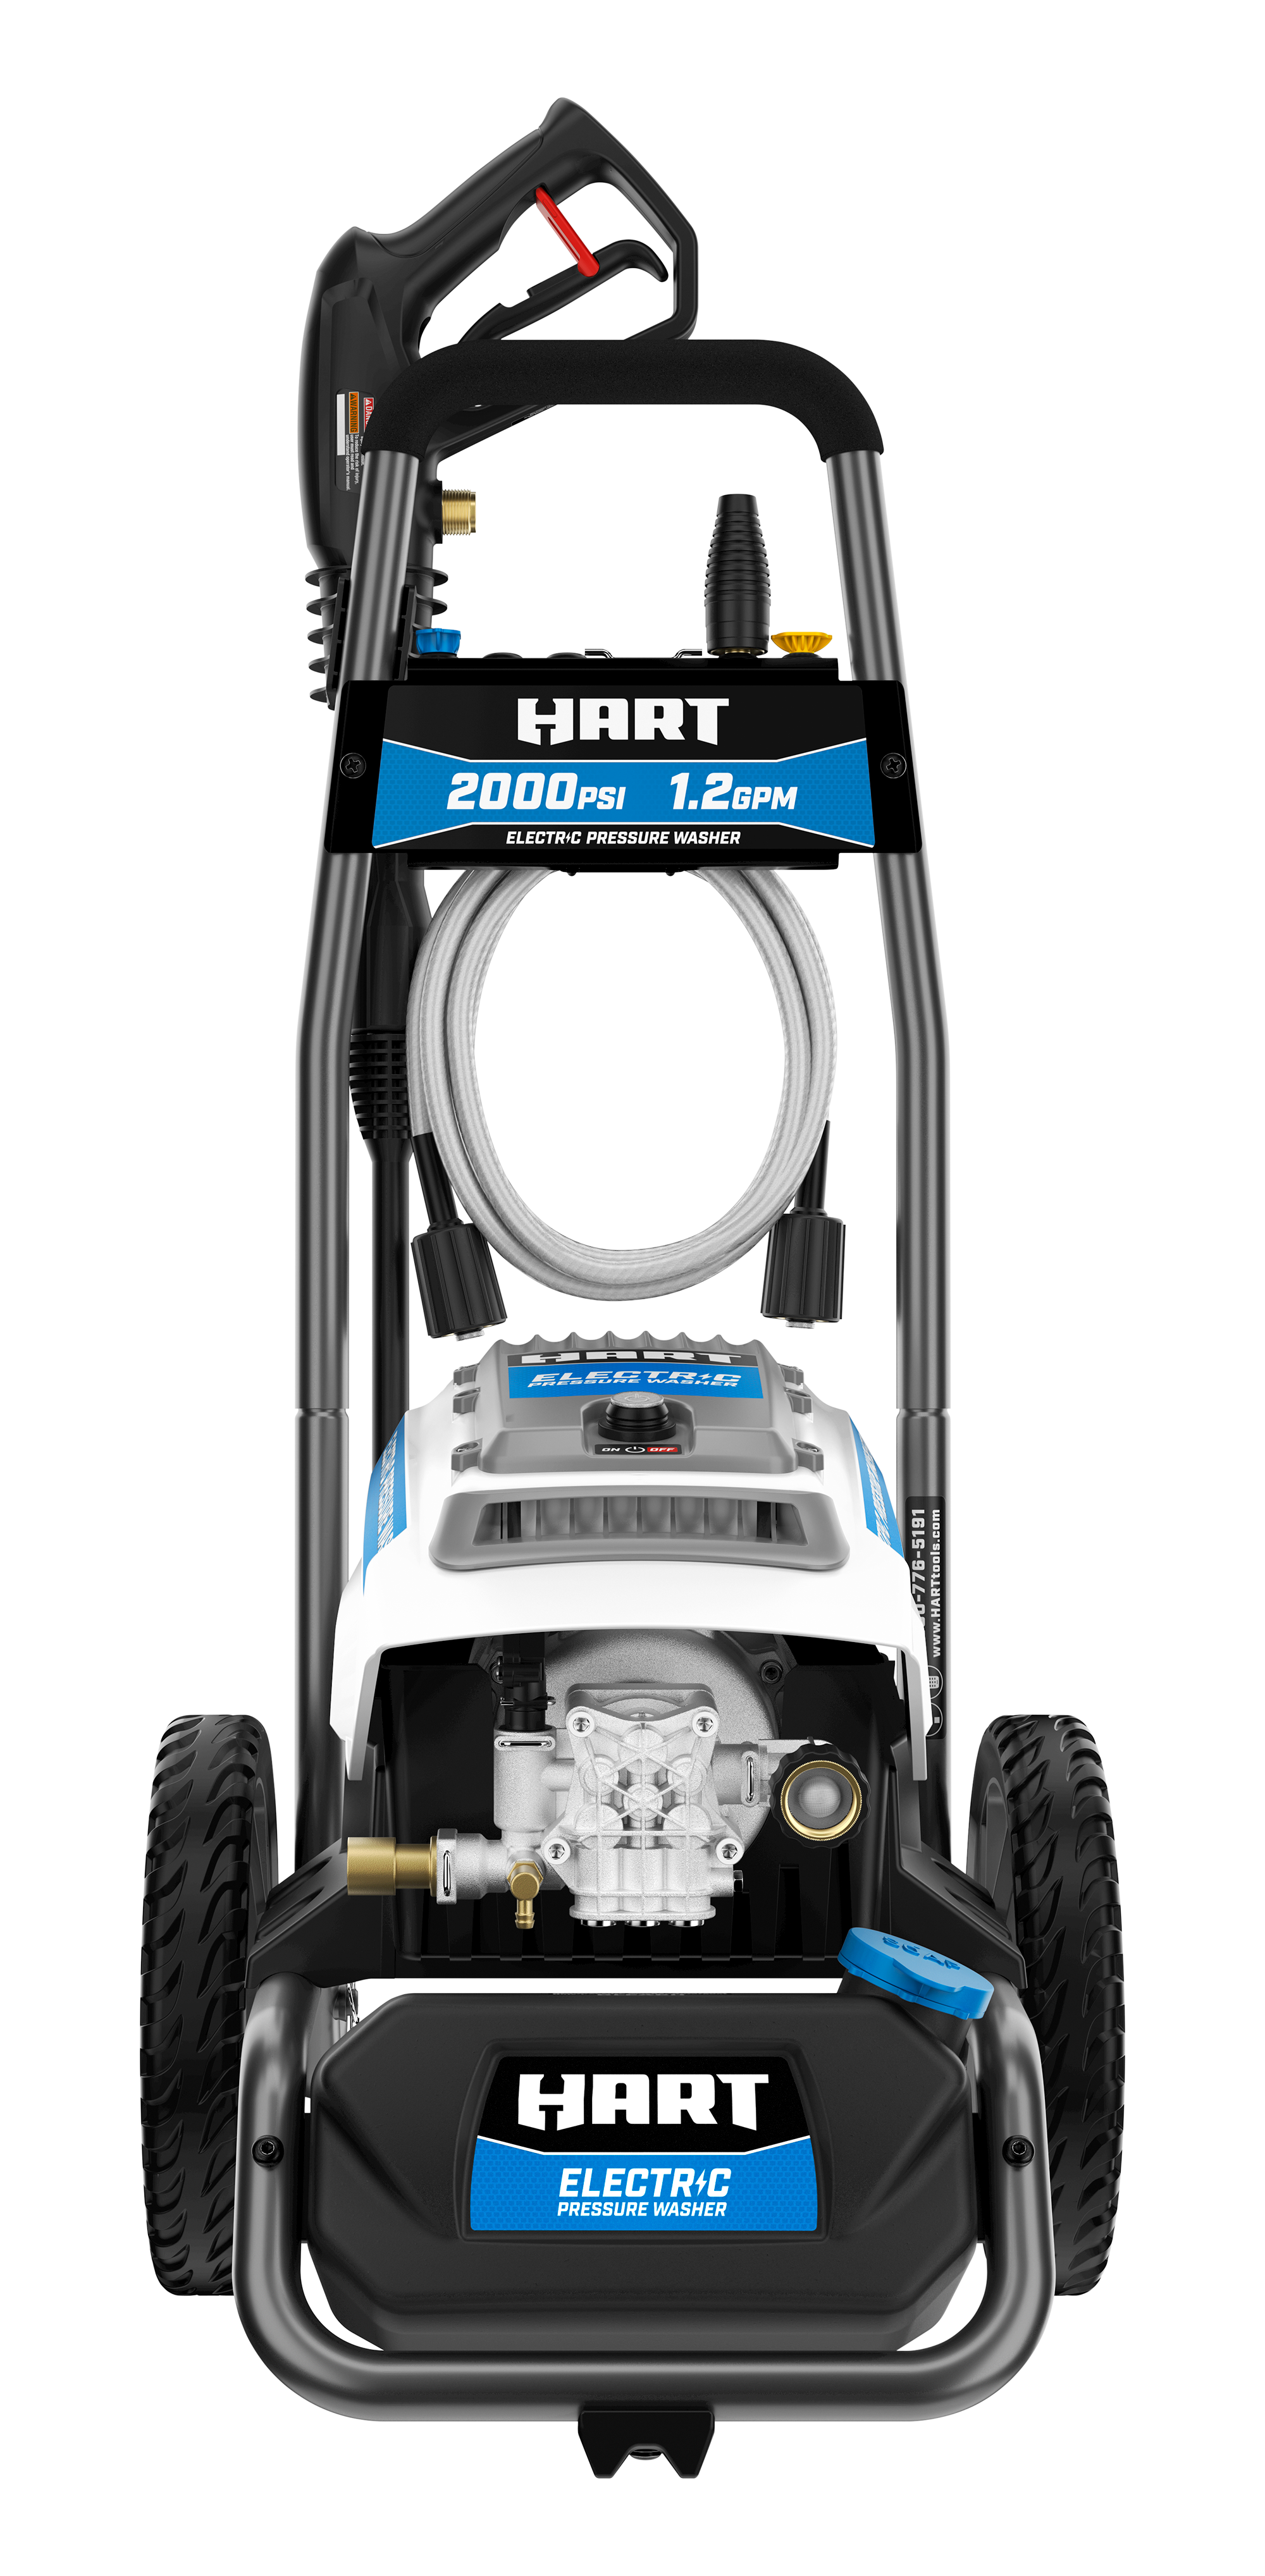 HART 2000PSI 1.2 GPM Electric Pressure Washer - image 4 of 10